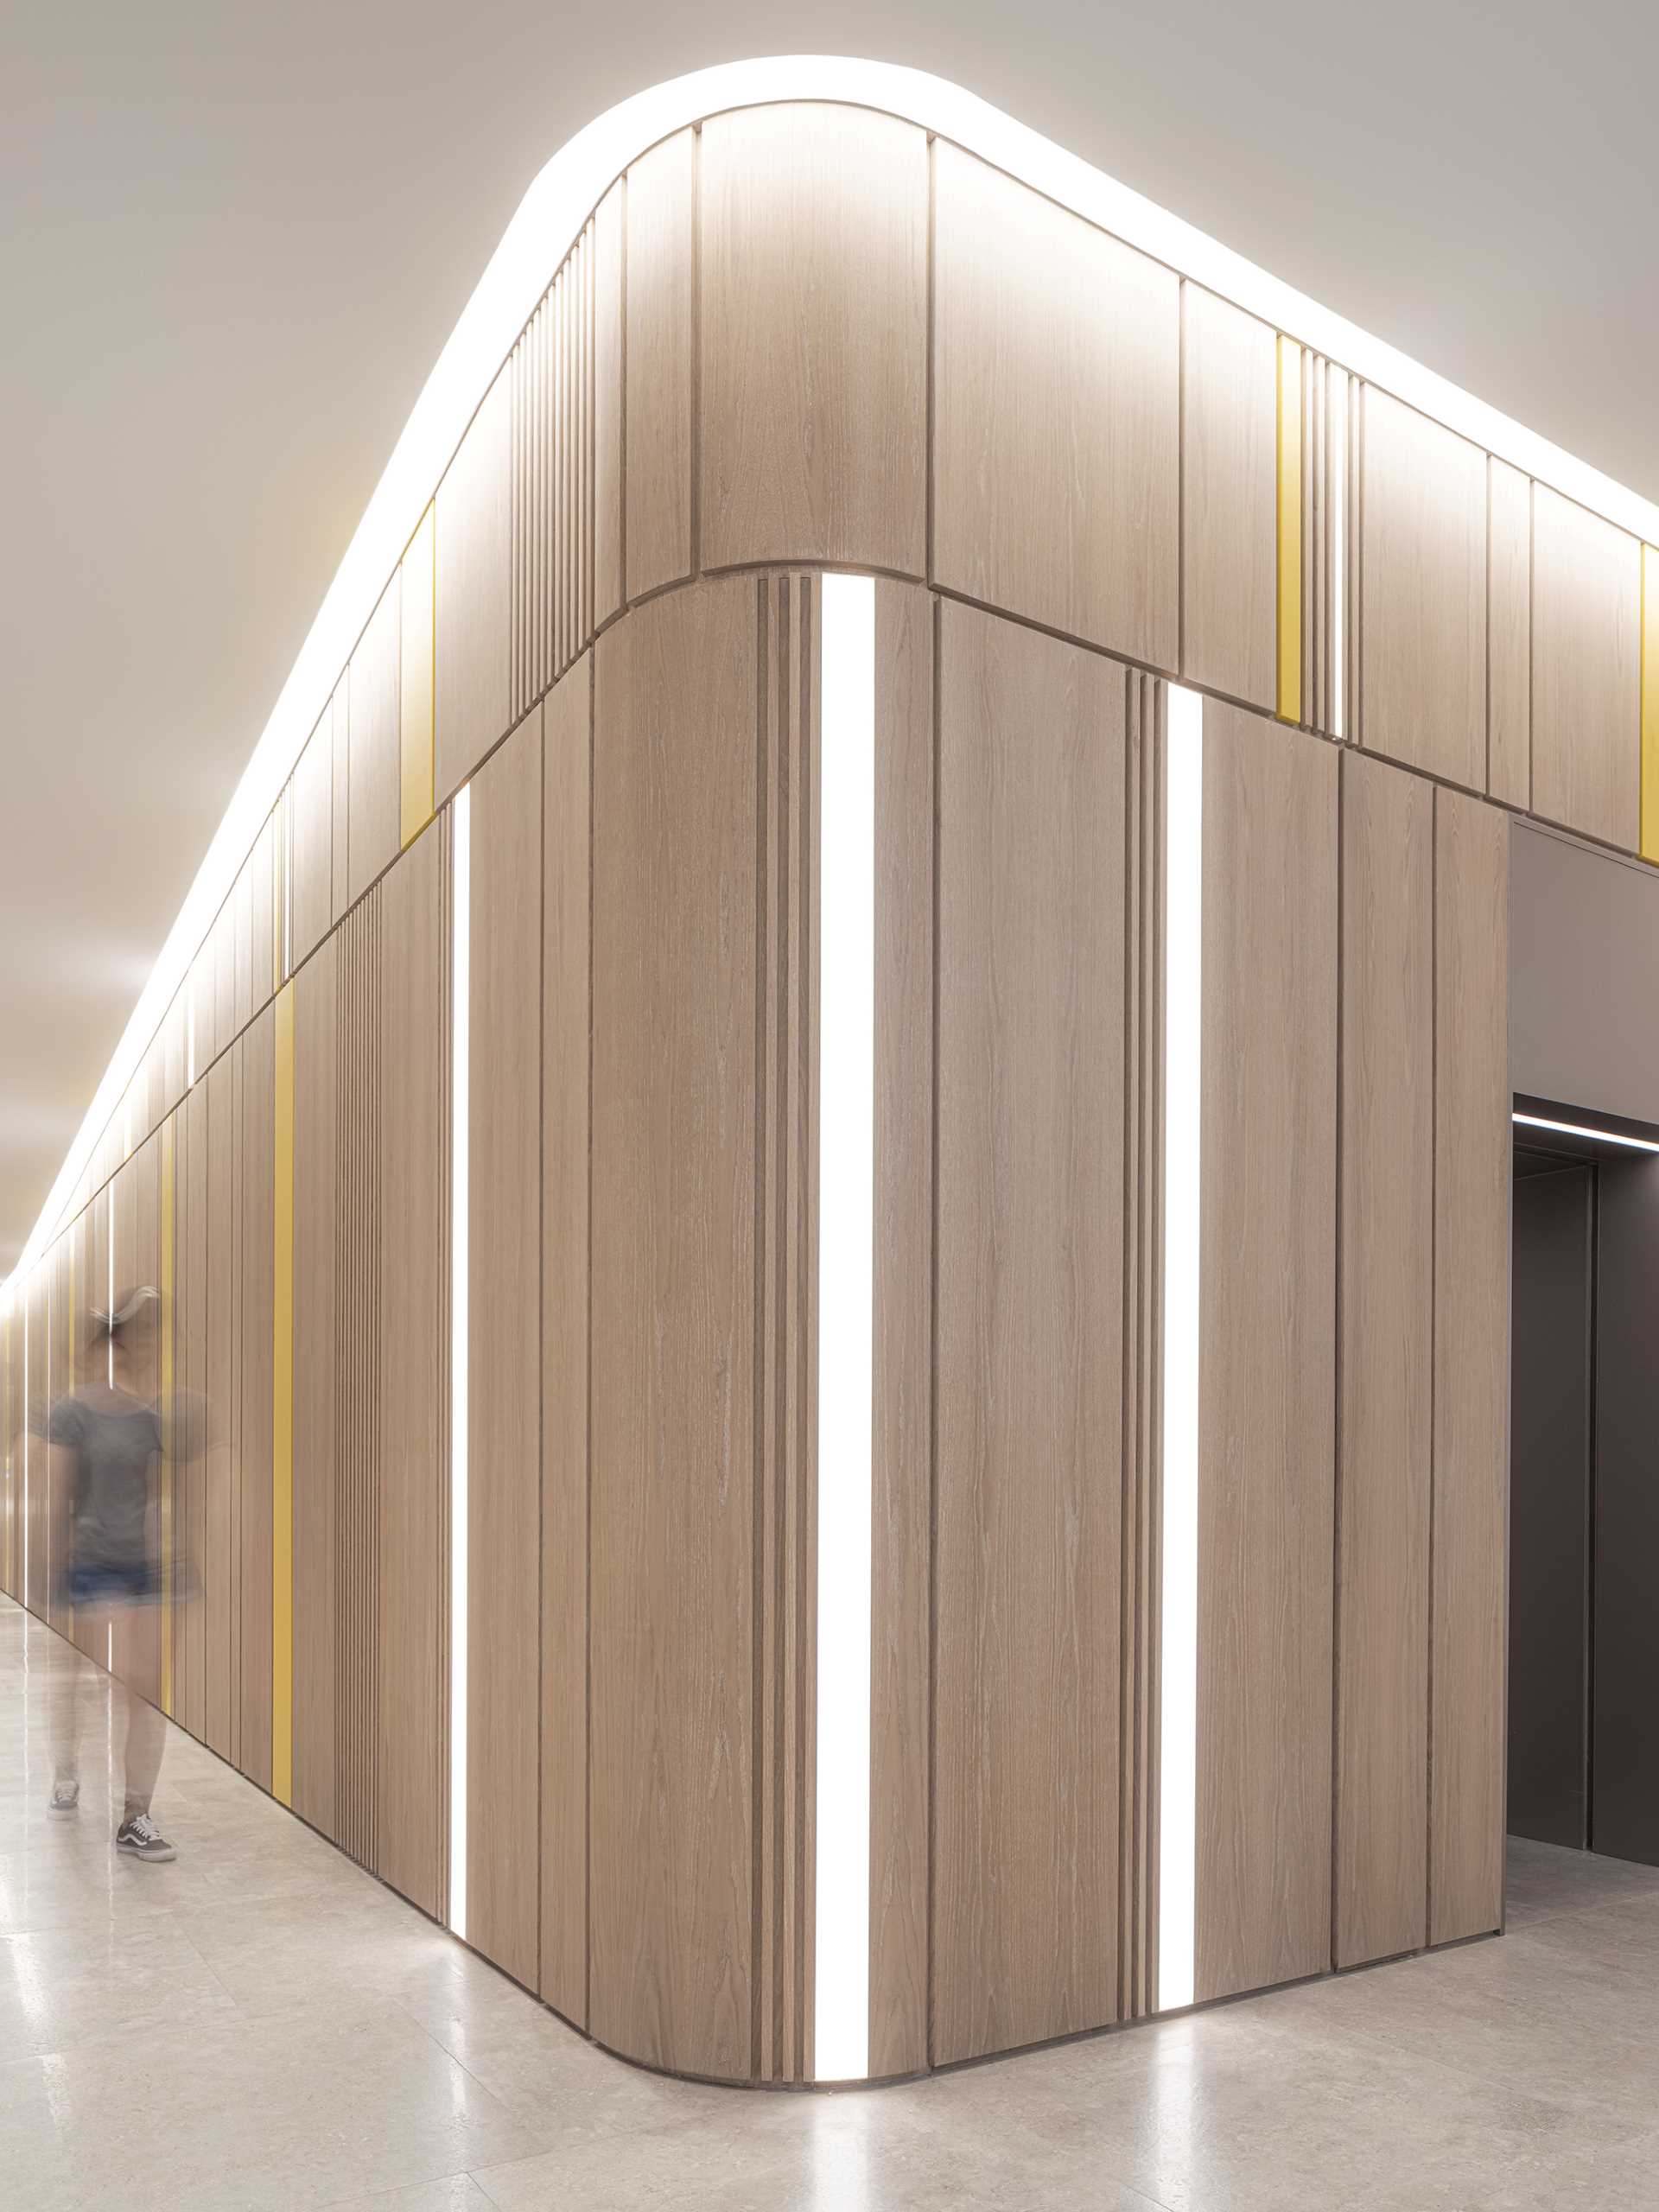 A wood wall that curves around the corners, includes hidden doors and vertical lights.